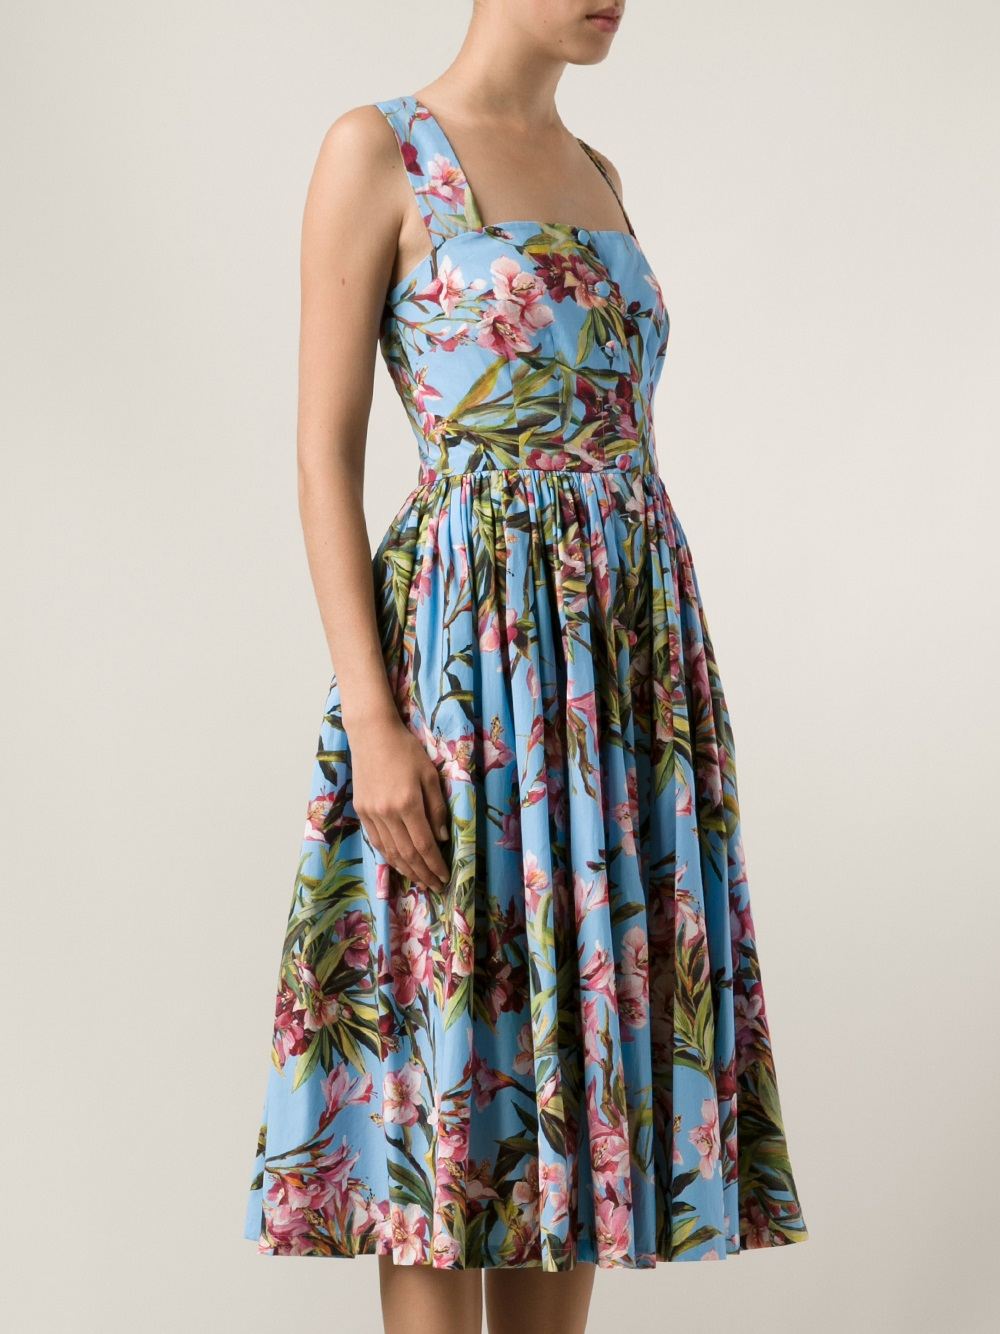 Dolce & gabbana Skirted Floral Dress in Blue | Lyst